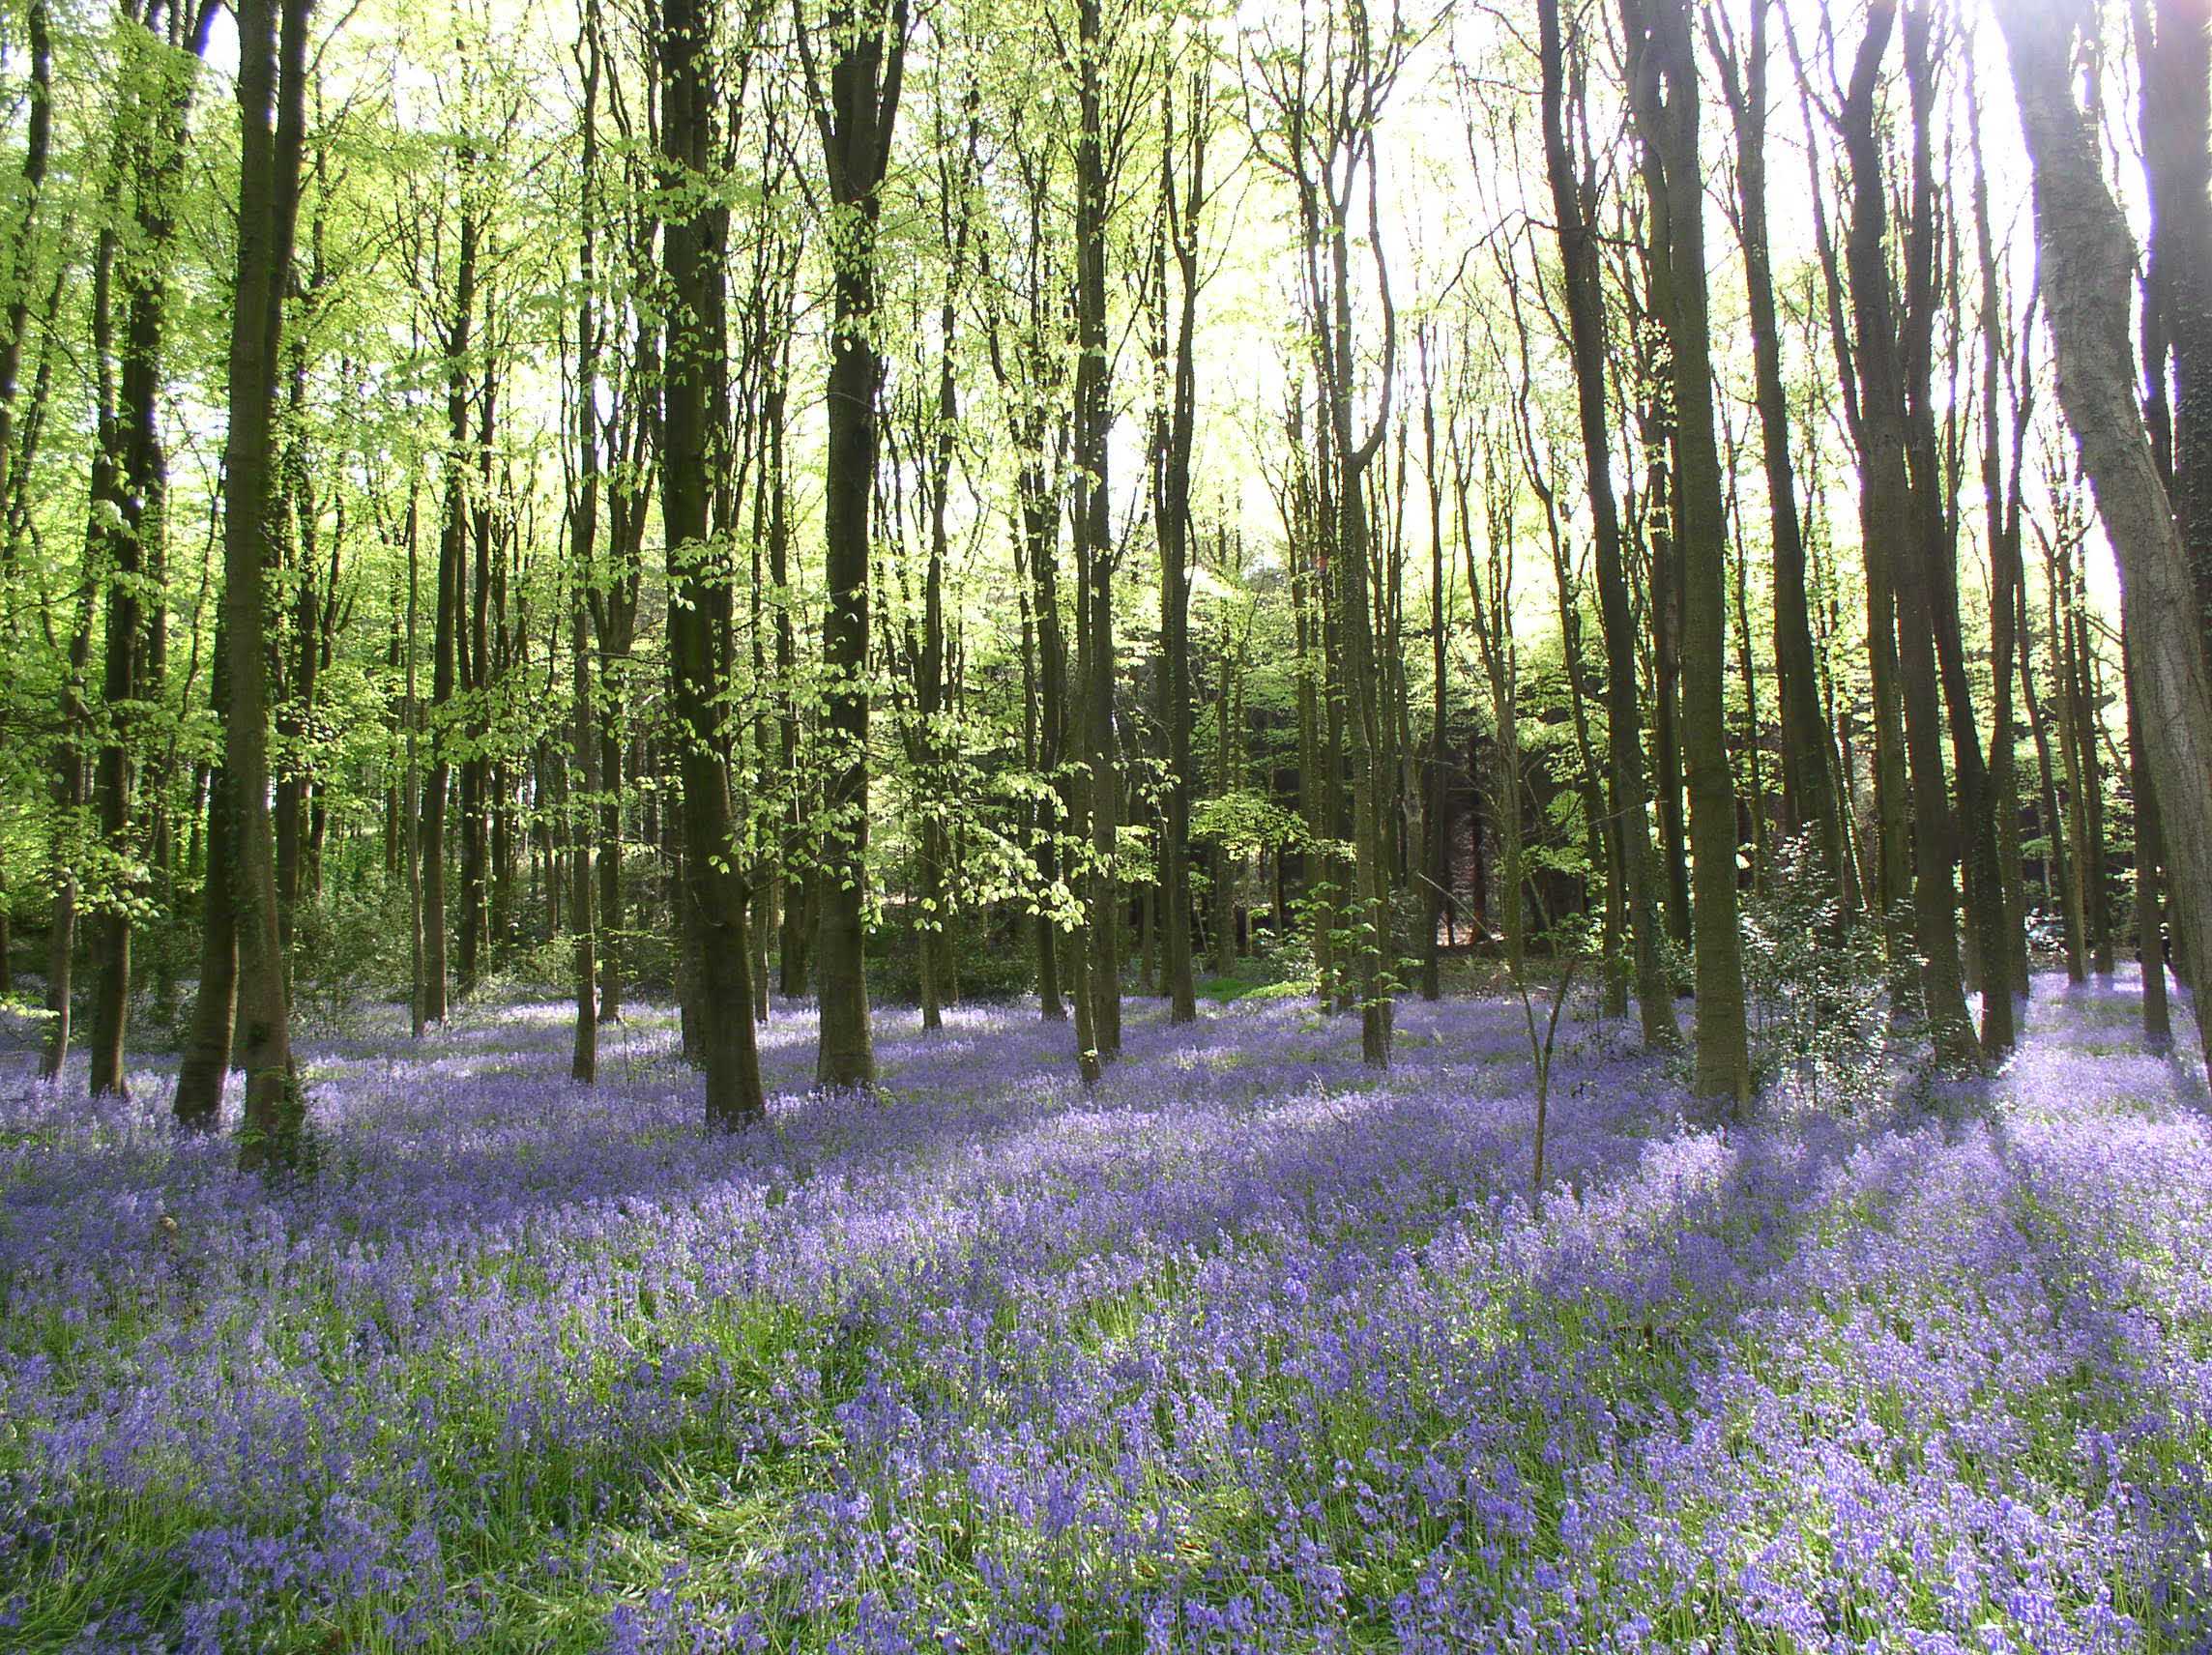 A forest of bluebells in amongst some trees